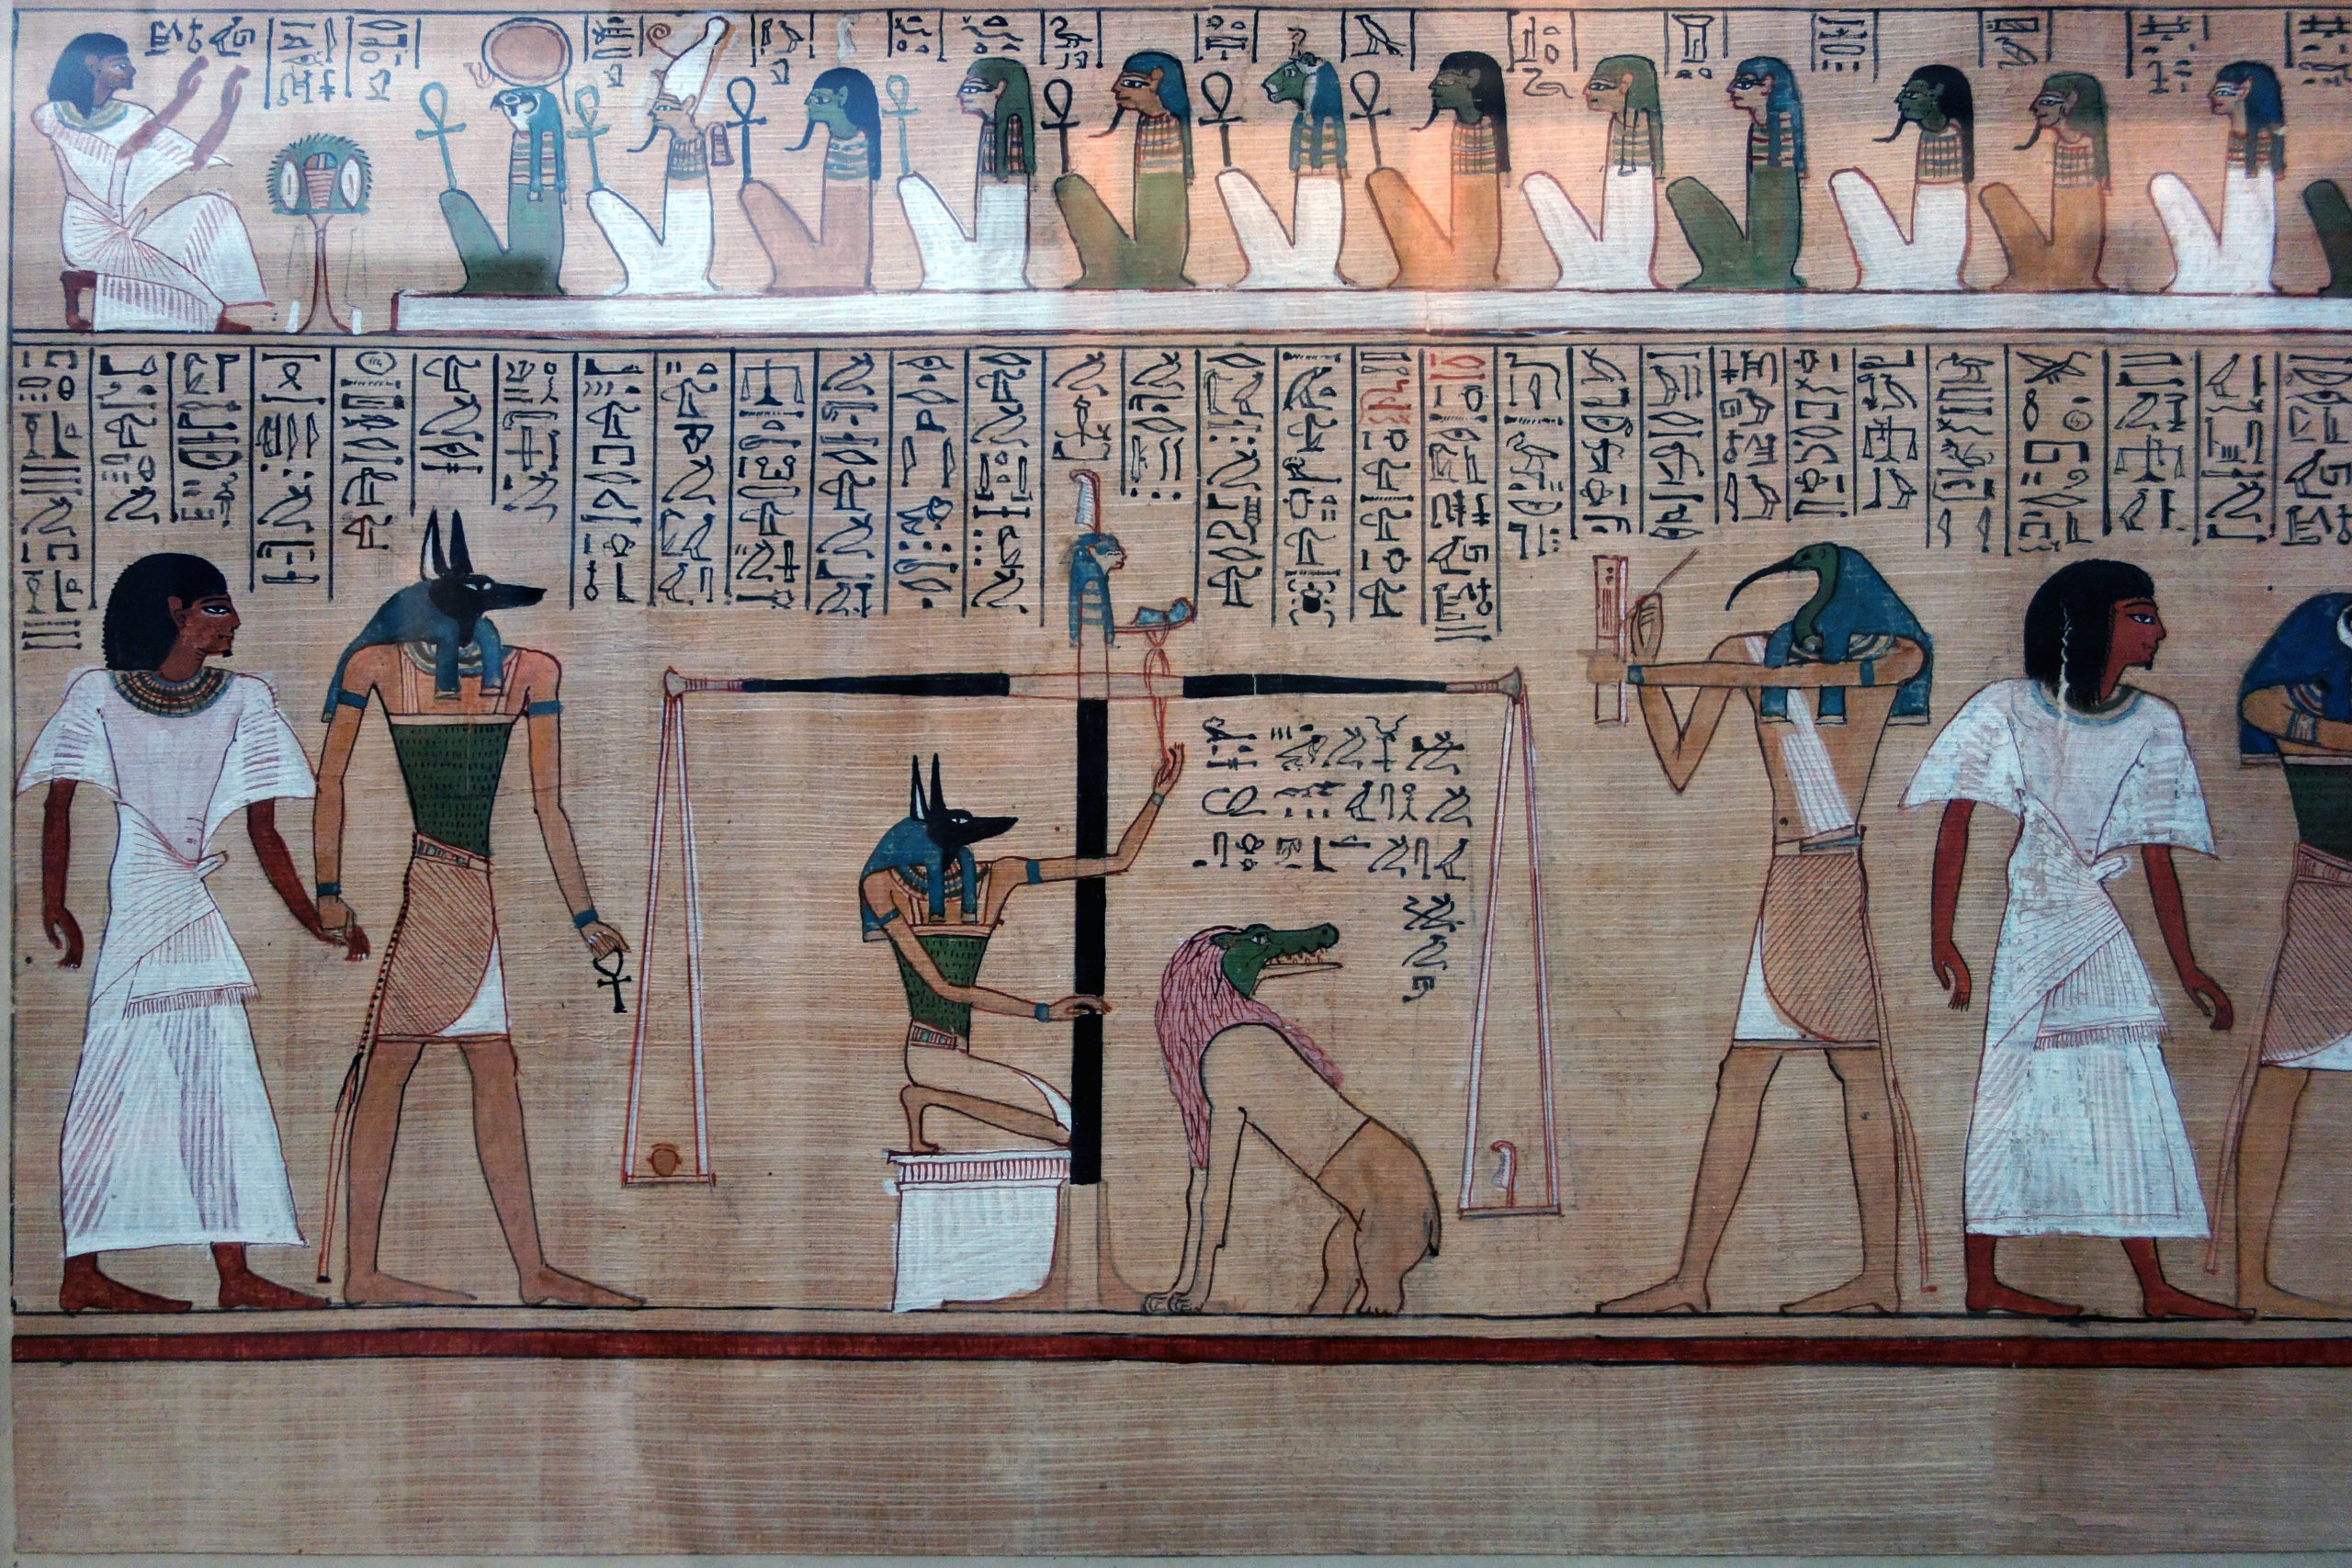 ancient egyptian drawings